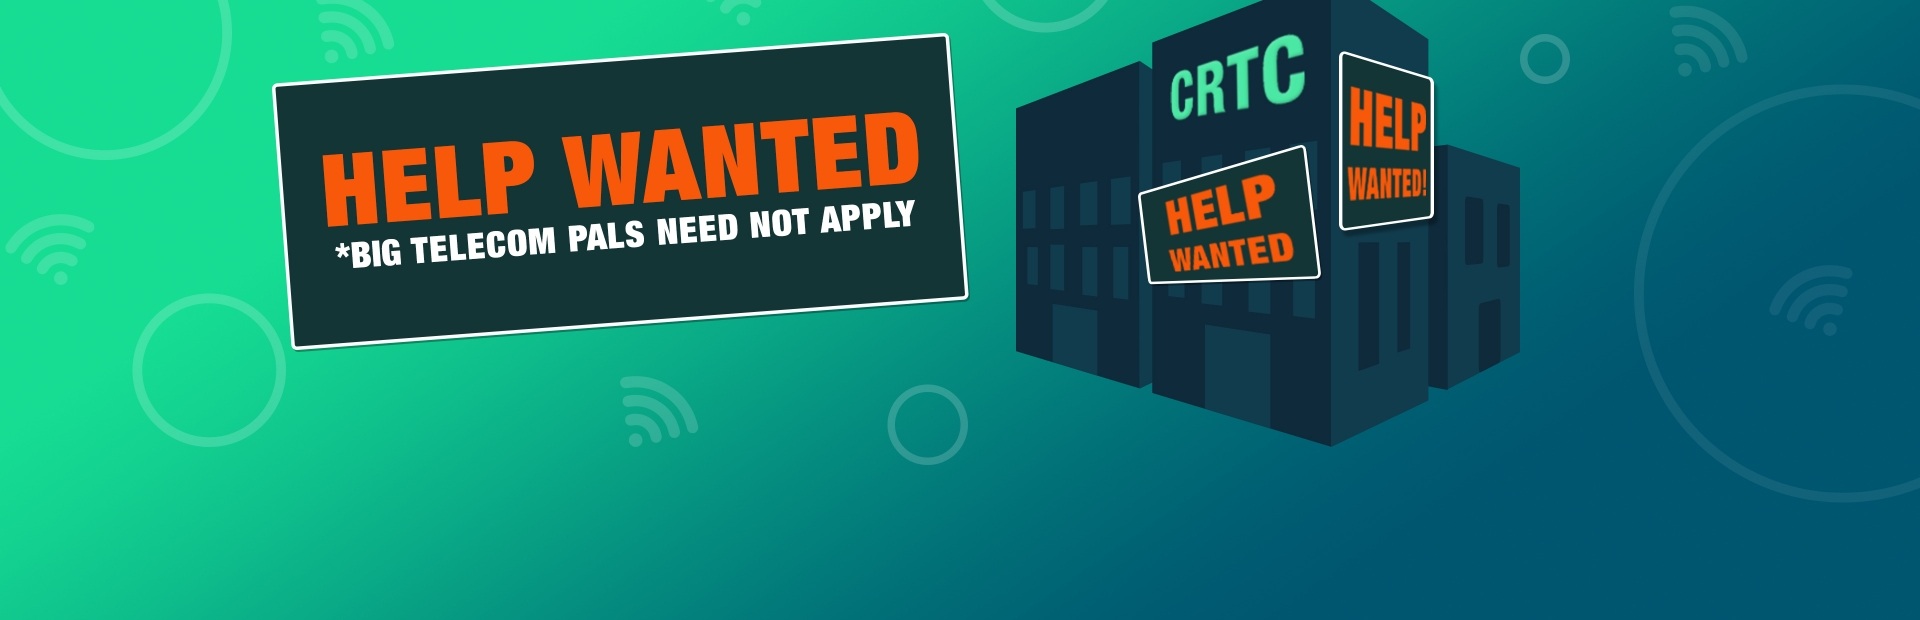 We need a pro-consumer, pro-Internet CRTC chair!